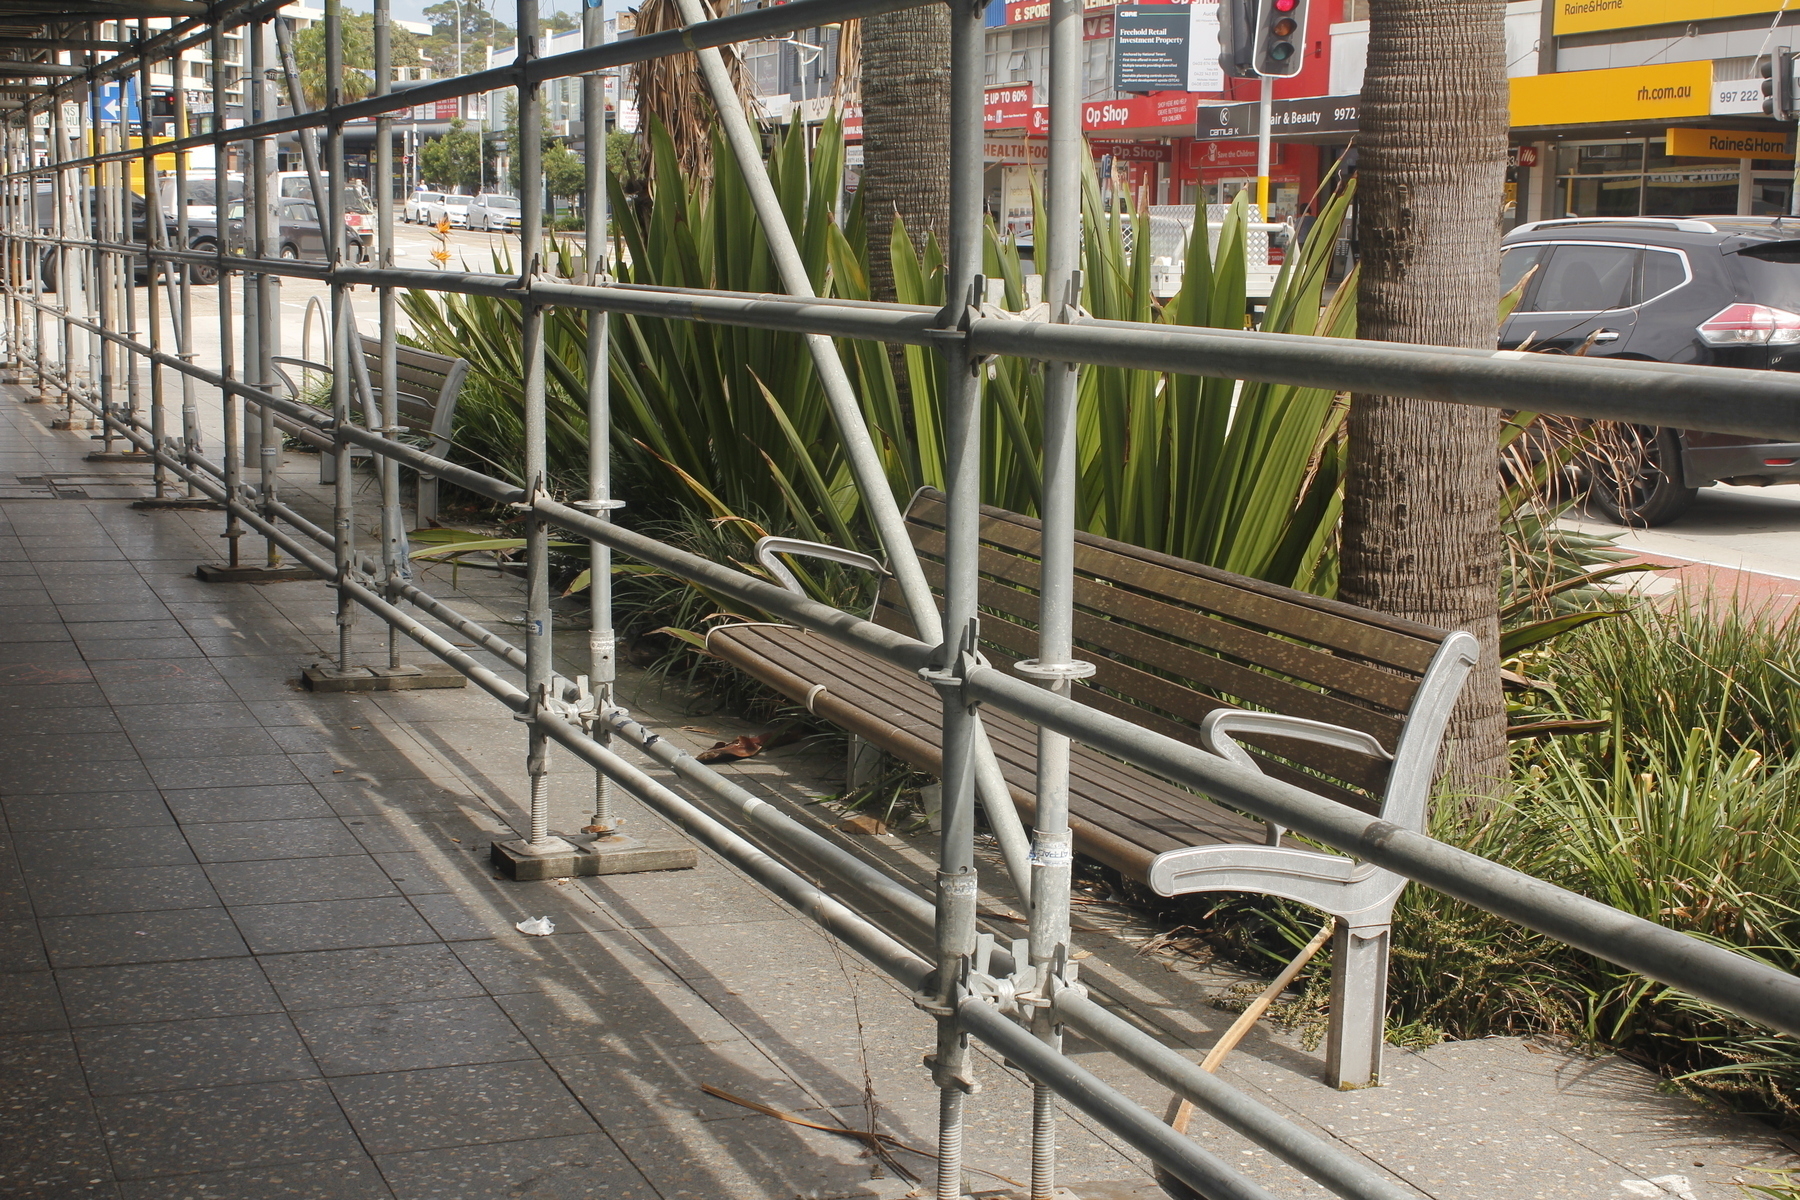 Beside a busy road, building scaffolding begins in the right foreground and stretches into the distance, top left corner. The scaffolding stands at the edge of a tiled footpath, and immediately outside it is a bench, with metal frames and arm-rests and brown timber slats. There’s very little room to sit comfortably. Against the back of the bench is a planted area with tall grasses, trunks of palm trees and tall, dense, spiky green semi-succulents.